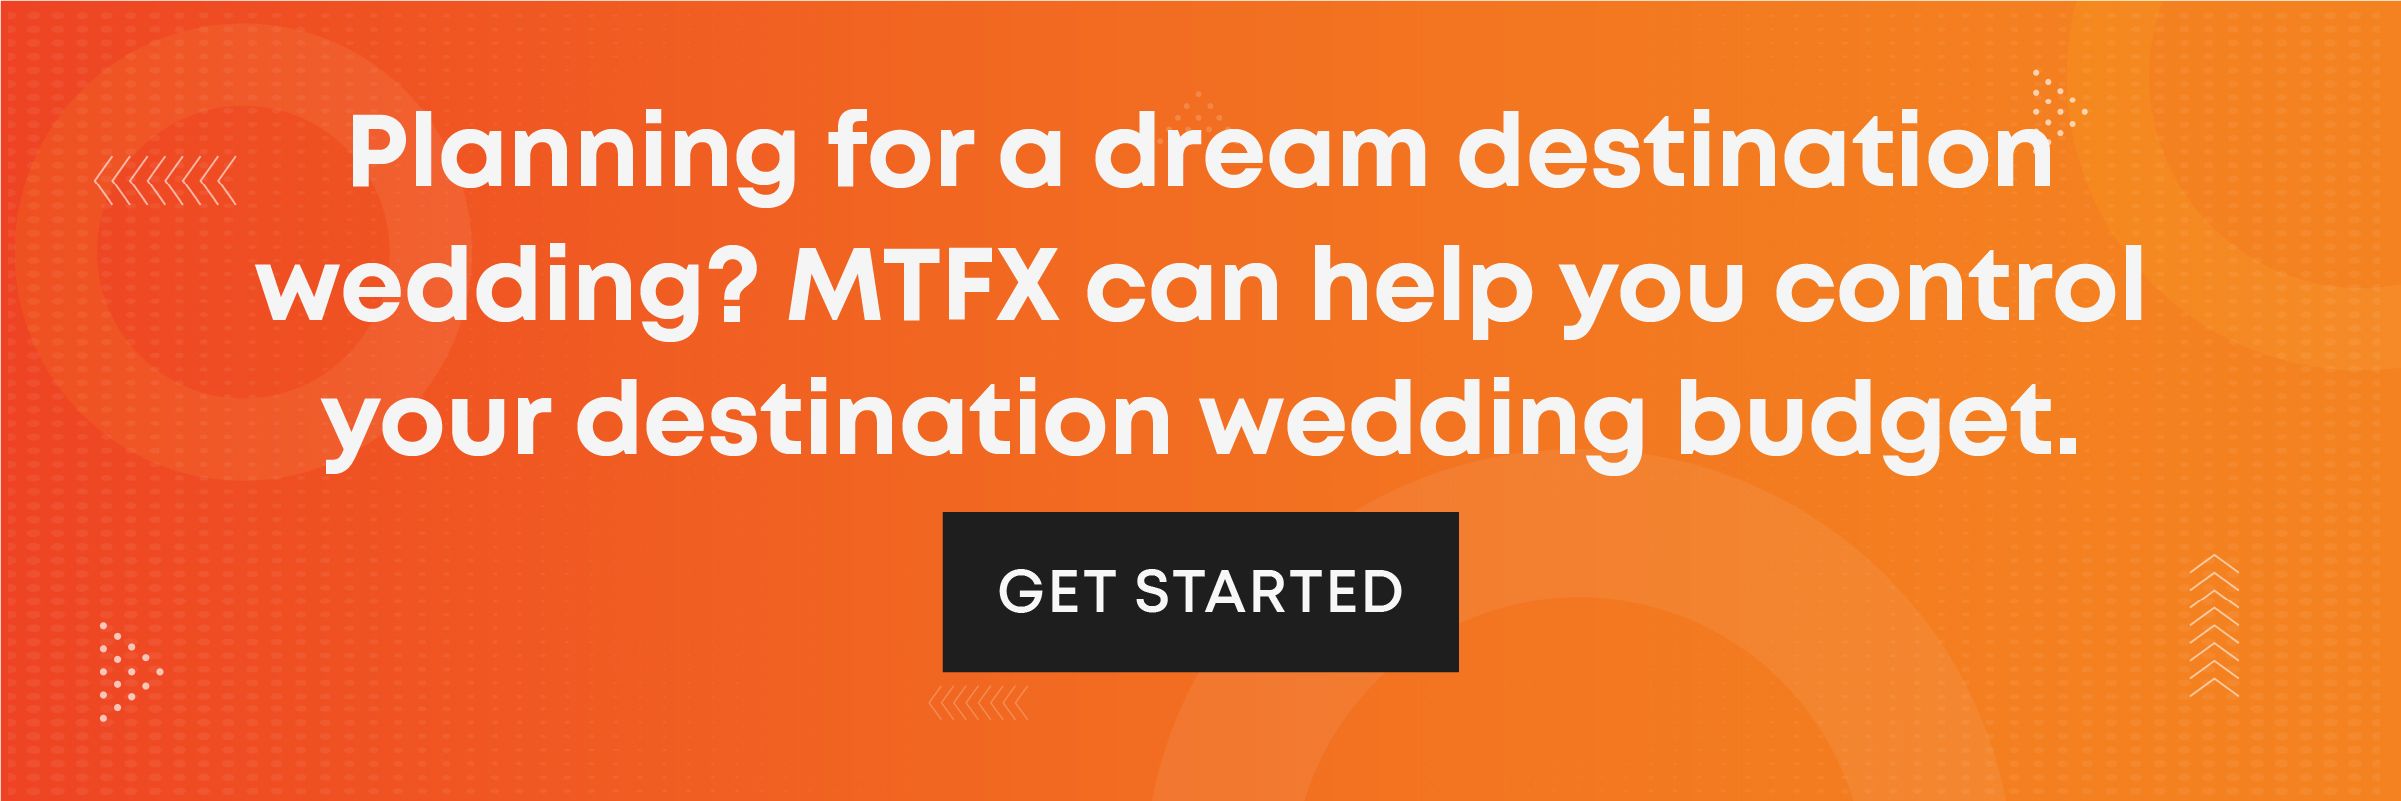 The best way to pay for a destination wedding is via an online money transfer specialist. For example, with MTFX, you can enjoy your big day abroad without big unnecessary costs.  Destination weddings are a popular, appealing choice for a good reason. For starters, a faraway wedding can be the stuff of fairytales. After all, it's easy to plan the perfect wedding when you have a range of stunning, romantic locations to choose from.  A destination wedding can also save costs if you combine a smaller guest list with an affordable wedding package. The good news is you can unlock additional benefits and save time, hassle, and more money by taking advantage of the best way to pay for a destination wedding.  What's the Best Way to Pay for a Destination Wedding? The most common payment options for a destination wedding are using your credit card or a money transfer service. Credit cards are great if you have a card with 0% interest on purchases, but some vendors only accept transfers to their bank accounts. This is normal with large transactions as the vendor may want to protect themselves from credit card fraud.  Even if the vendor accepts credit card payments, you may face hefty foreign transaction fees. A better alternative is to find a trusted company that offers the cheapest and safest way to send money internationally. Unfortunately, this won't be your bank because banks are usually the most expensive transfer providers.  An online money transfer specialist is typically the best option. You can save as many dollars as possible in terms of fees and exchange rates while making sure the money gets to your vendors correctly and safely. In addition, sending money abroad online is quick and easy, saving you time and a lot of hassle. If you use MTFX, you can pay for a wedding planner, accommodation, venue fees, and more anytime, anywhere, in a few clicks.  Why Do Exchange Rates Matter When Paying for a Destination Wedding? When transferring thousands internationally, it's essential to protect your spending from exchange rate markups and fluctuations. The exchange rate matters because it's one of the most significant factors affecting the cost of your transfers. For instance, if you're getting married in Europe, a $25,000 budget (CAD) can get you 17,000 euros at an exchange rate of 0.68. But if the rate drops to 0.64, you get 16,000 euros – a big difference.  The first solution to the problem of exchange rate markups is to avoid banks since they add a margin on top of the real, mid-market rate. Instead, use a currency transfer specialist like MTFX that offers the real exchange rate with no hidden fees. Specialist providers offer more than friendly service. They're also transparent about their fees, so there are no surprises.  The second solution to the problem of exchange rate fluctuations is to use foreign exchange tools, such as forward contracts to lock in a desirable exchange rate for a long time. That way, you can protect your budget and save hundreds or thousands should the exchange rate move against you before your big day.   10 Tips to Save Money on a Destination Wedding A dedicated money transfer service helps you avoid unnecessary fees and unpredictable currency fluctuations. Here are 10 more tips to save money and have a dream destination wedding without breaking the bank.  Choose an all-inclusive destination wedding package. These often include key elements, such as venue, decor, and honeymoon, in one bundled, affordable price. Work with a local wedding planner. The extra expense may be worth it because the right professional can negotiate better prices and provide insider tips to help you save money. Hire local professionals. Bringing in your florist, hairstylist, or makeup person will increase travel and lodging expenses. Instead, hire nearby professionals and local vendors, but verify their reputation first. Get married in the off-season. There's less demand for vendors and venues during the off-season (usually winter) compared to the wedding peak season. So, prices tend to be dramatically lower. Hunt for shopping deals. Turn into a savvy shopper by starting early. Look for great deals on smaller purchases, such as accessories, favours, and gifts. Choose a more accessible wedding venue. A destination wedding itself may be inexpensive, but flights, visa fees, and transportation can add up. You can minimize these costs by choosing a venue that's easier and cheaper to arrive at. Consider tax rates. For example, some countries have high VAT rates, meaning the final price is often higher than the quoted price. Research foreign taxes and choose locations with better tax rates. Invest in insurance. Taking out wedding, health, and travelling insurance can protect you from unexpected expenses. It's best to plan for emergencies like cancelling your wedding due to bad weather, losing your baggage, or getting injured abroad. Downsize your guest list. A smaller guest list allows you to enjoy a more intimate affair with significantly lower costs. Explore more money-saving hacks. The list includes getting married in advance to save on legal fees, driving instead of flying, and asking your guests to cover their own travel expenses and lodgings. Best Places for a Destination Wedding Here are some of the best places for a destination wedding from sources across the web to inspire you.  Italy is a romantic paradise with plenty of majestic backdrops. The best wedding regions include Puglia, Tuscany, Florence, and Rome. Mexico offers the sun, sand, and sea in a cost-effective package. Popular locations are Cancun, Tulum, Playa Del Carmen, and Cabo San Lucas. The Caribbean is a treasure trove of breathtaking wedding spots and five-star beach resorts. You can have an exotic wedding in Jamaica, Dominican Republic, The Bahamas, St. Lucia, Aruba, or Barbados. The United States is an easy pick for a destination wedding as it's next door to Canada. Many couples choose to get married in places like Las Vegas, New York City, Hawaii, and Florida. MTFX lets you transfer large sums of money internationally in many major and exotic currencies to hundreds of destinations. So, don't let this list limit you. When it comes to destination weddings, the world is your oyster – from Costa Rica, Thailand, and Greece to France, Spain, and The Maldives, with more options in between.  Pay for Your Destination Wedding Online Today You can pay for your dream destination wedding online, with speed and ease, whether that involves tropical islands, stunning mountain ranges, or enchanting green landscapes on the other side of the world.  MTFX offers competitive exchange rates and low fees to help you save money and hassle, so your destination wedding is worth travelling for. You can open your online, secure account in minutes, get expert, personalized guidance, and make one-off or regular transfers 24/7 – all without a foreign bank account.  Open an account today to pay for your destination wedding with MTFX and make the most of your money and your big day.     Popular Related Articles;  How to Convert your Canadian Dollars to US Dollars? How to Send Money to the US from Canada? How to Convert your Canadian Dollars to Euros? How to Convert your Canadian Dollars to UK Pounds? How to Send Money Abroad and Make International Payments